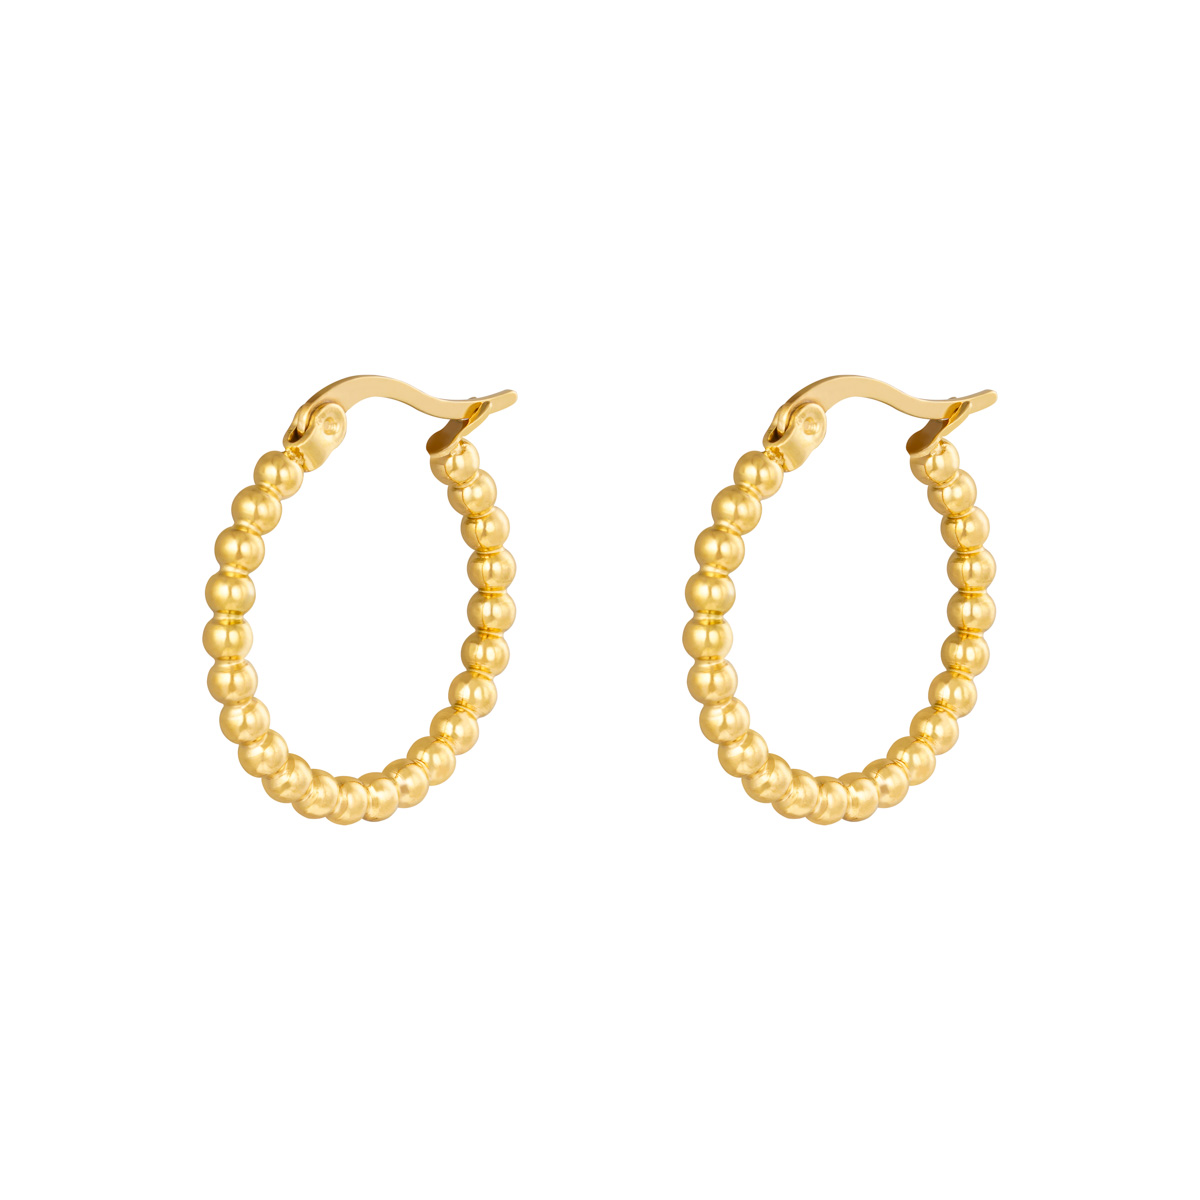 Boucles d'oreilles Hoops Spheres 22 mm (Pack with plastic bag) h5 